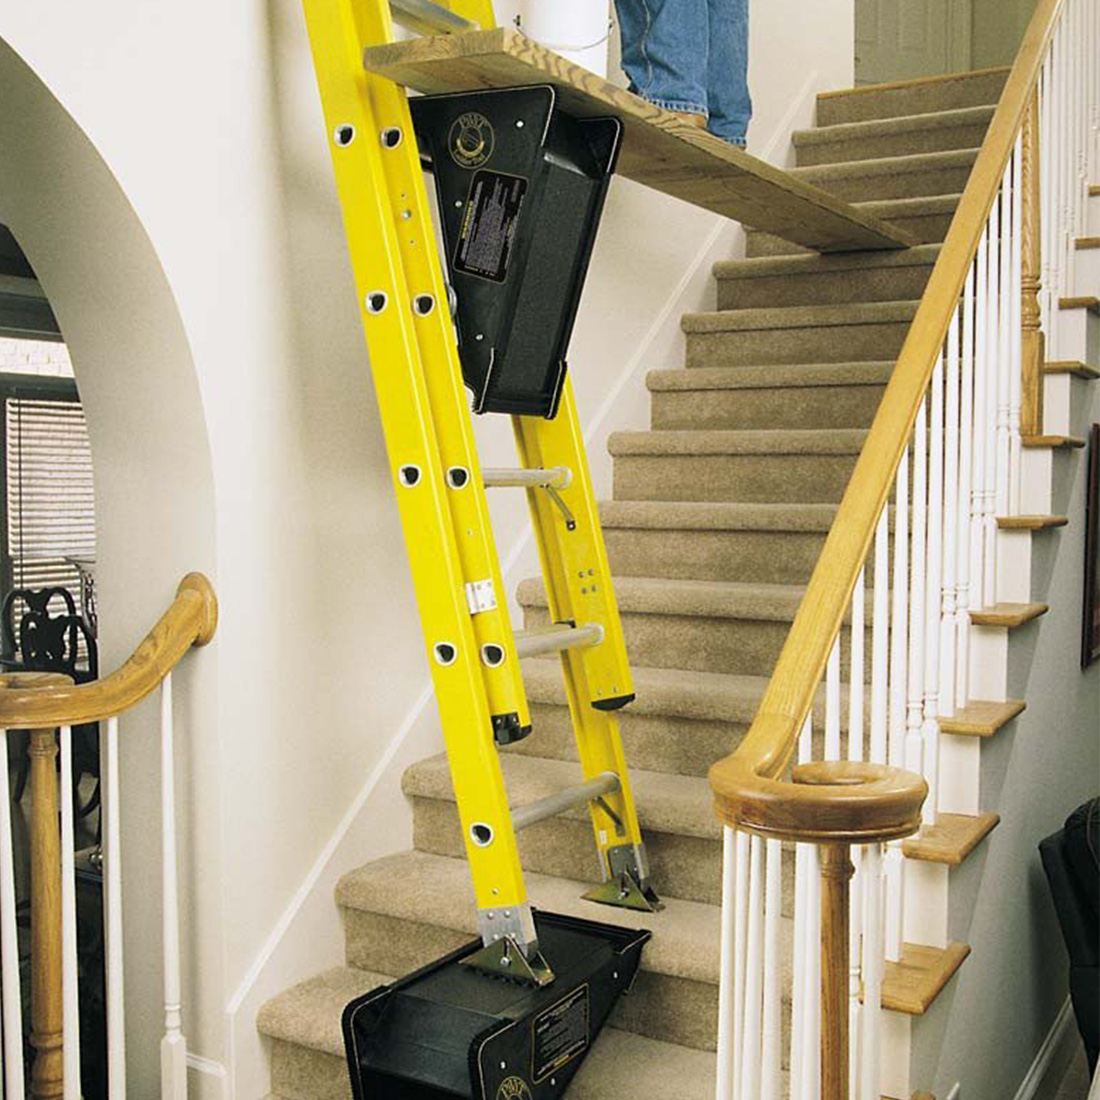 Pro-Vision-Tools-Pivit-Ladder-Tool-On-Stairs